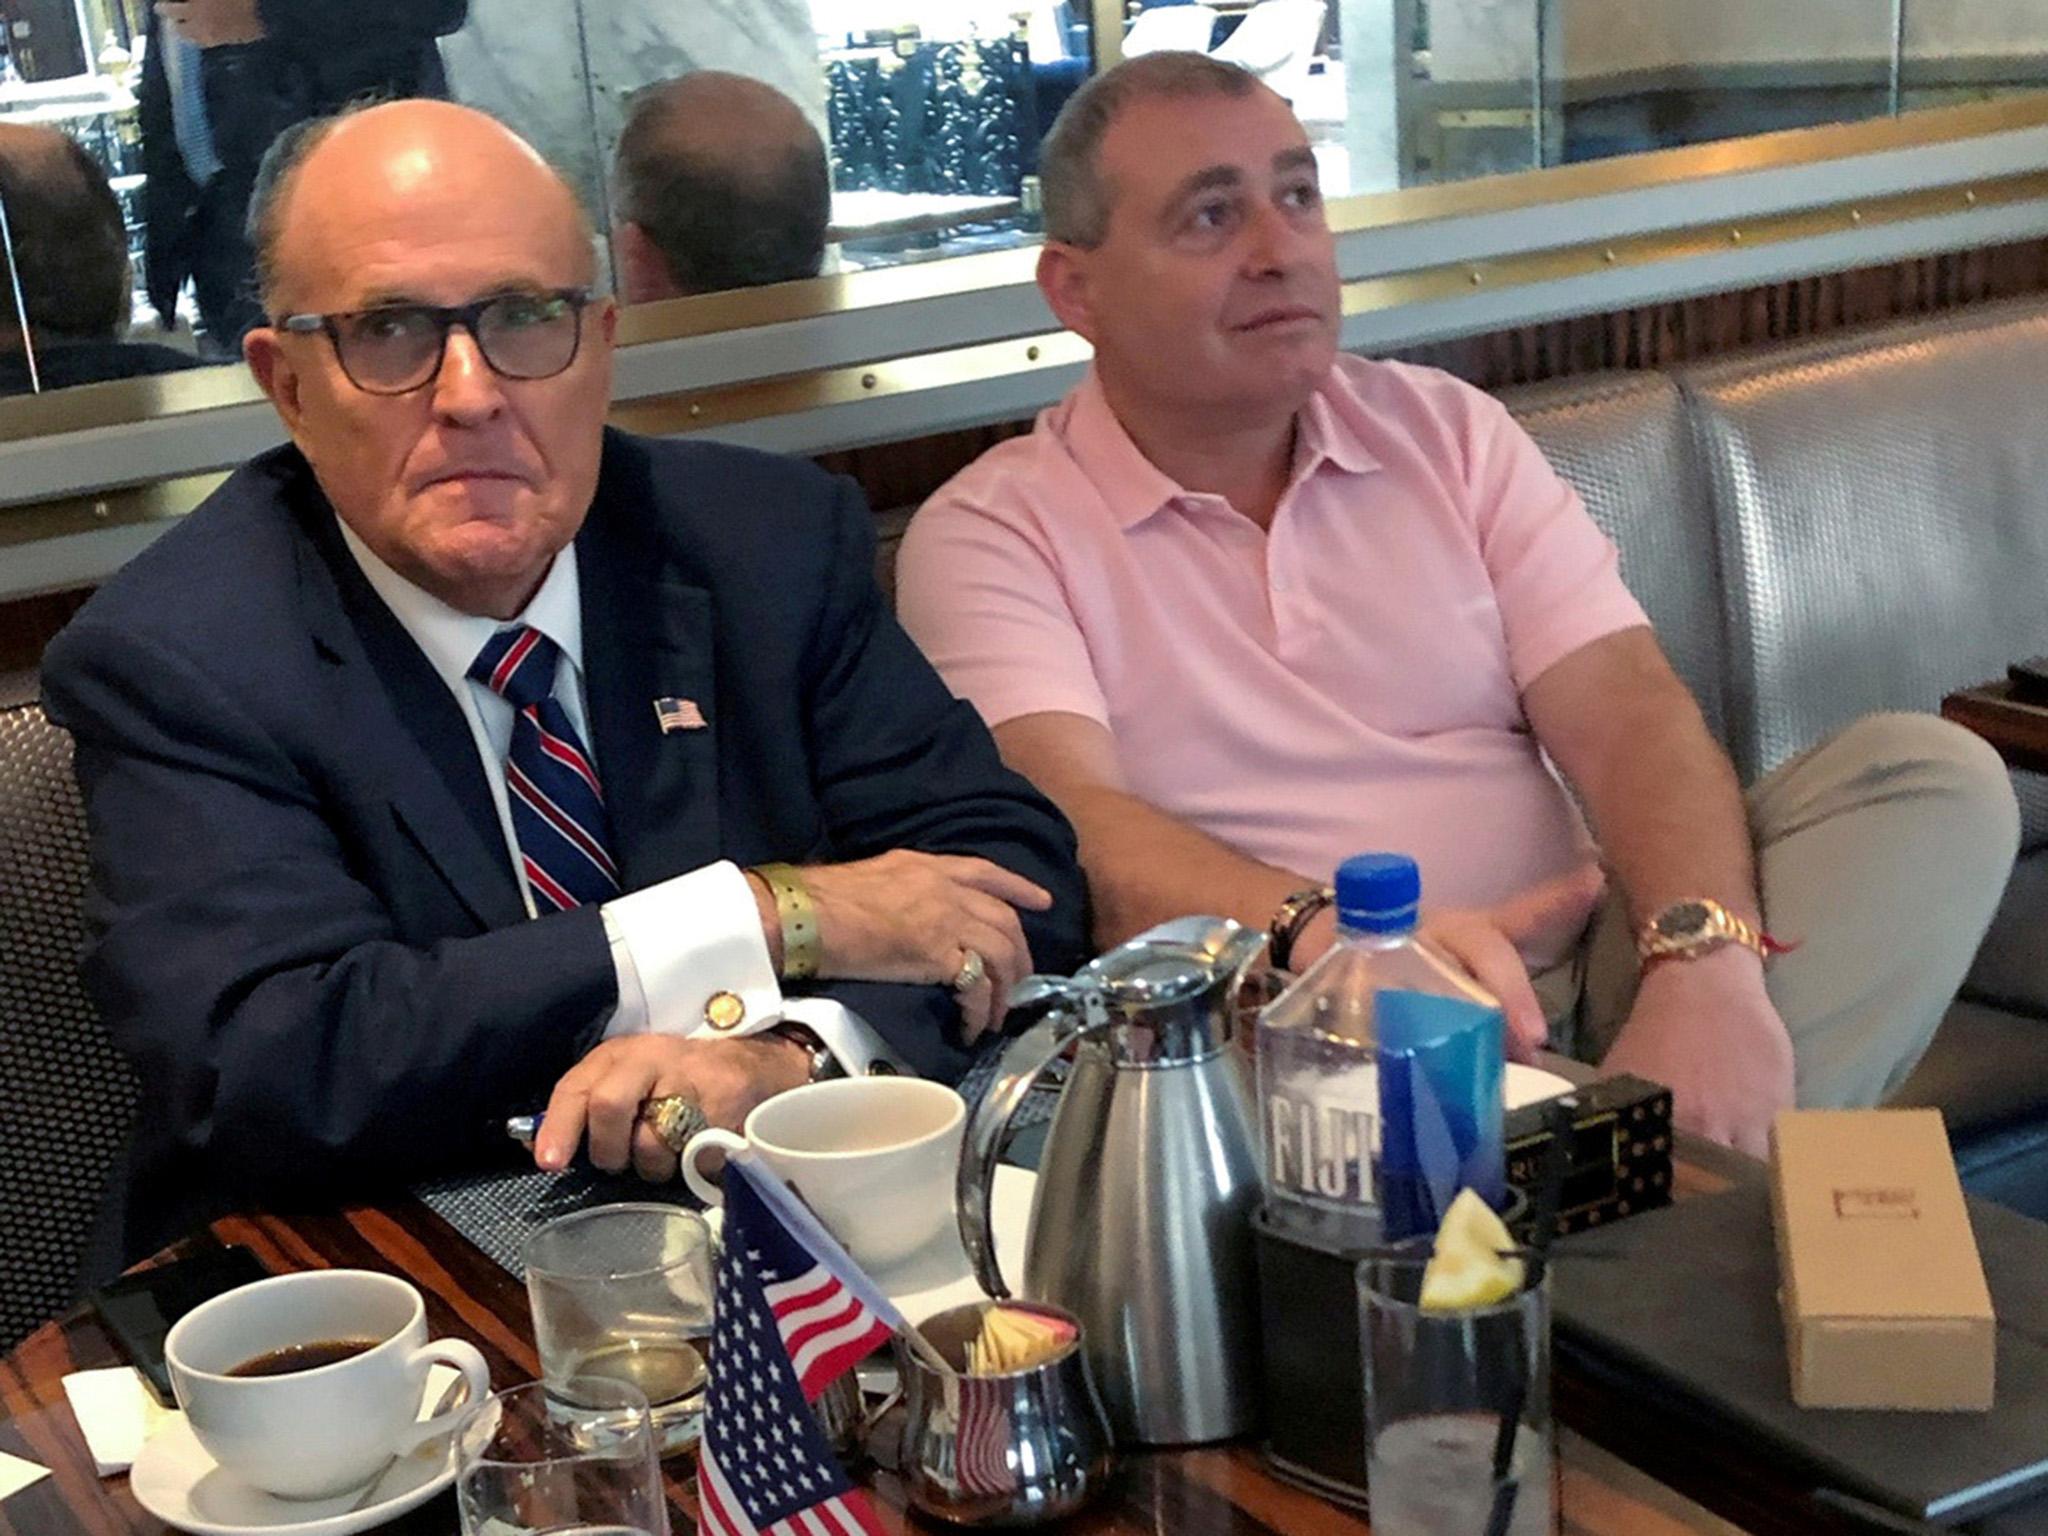 Lev Parnas, right, pictured with Rudy Giuliani